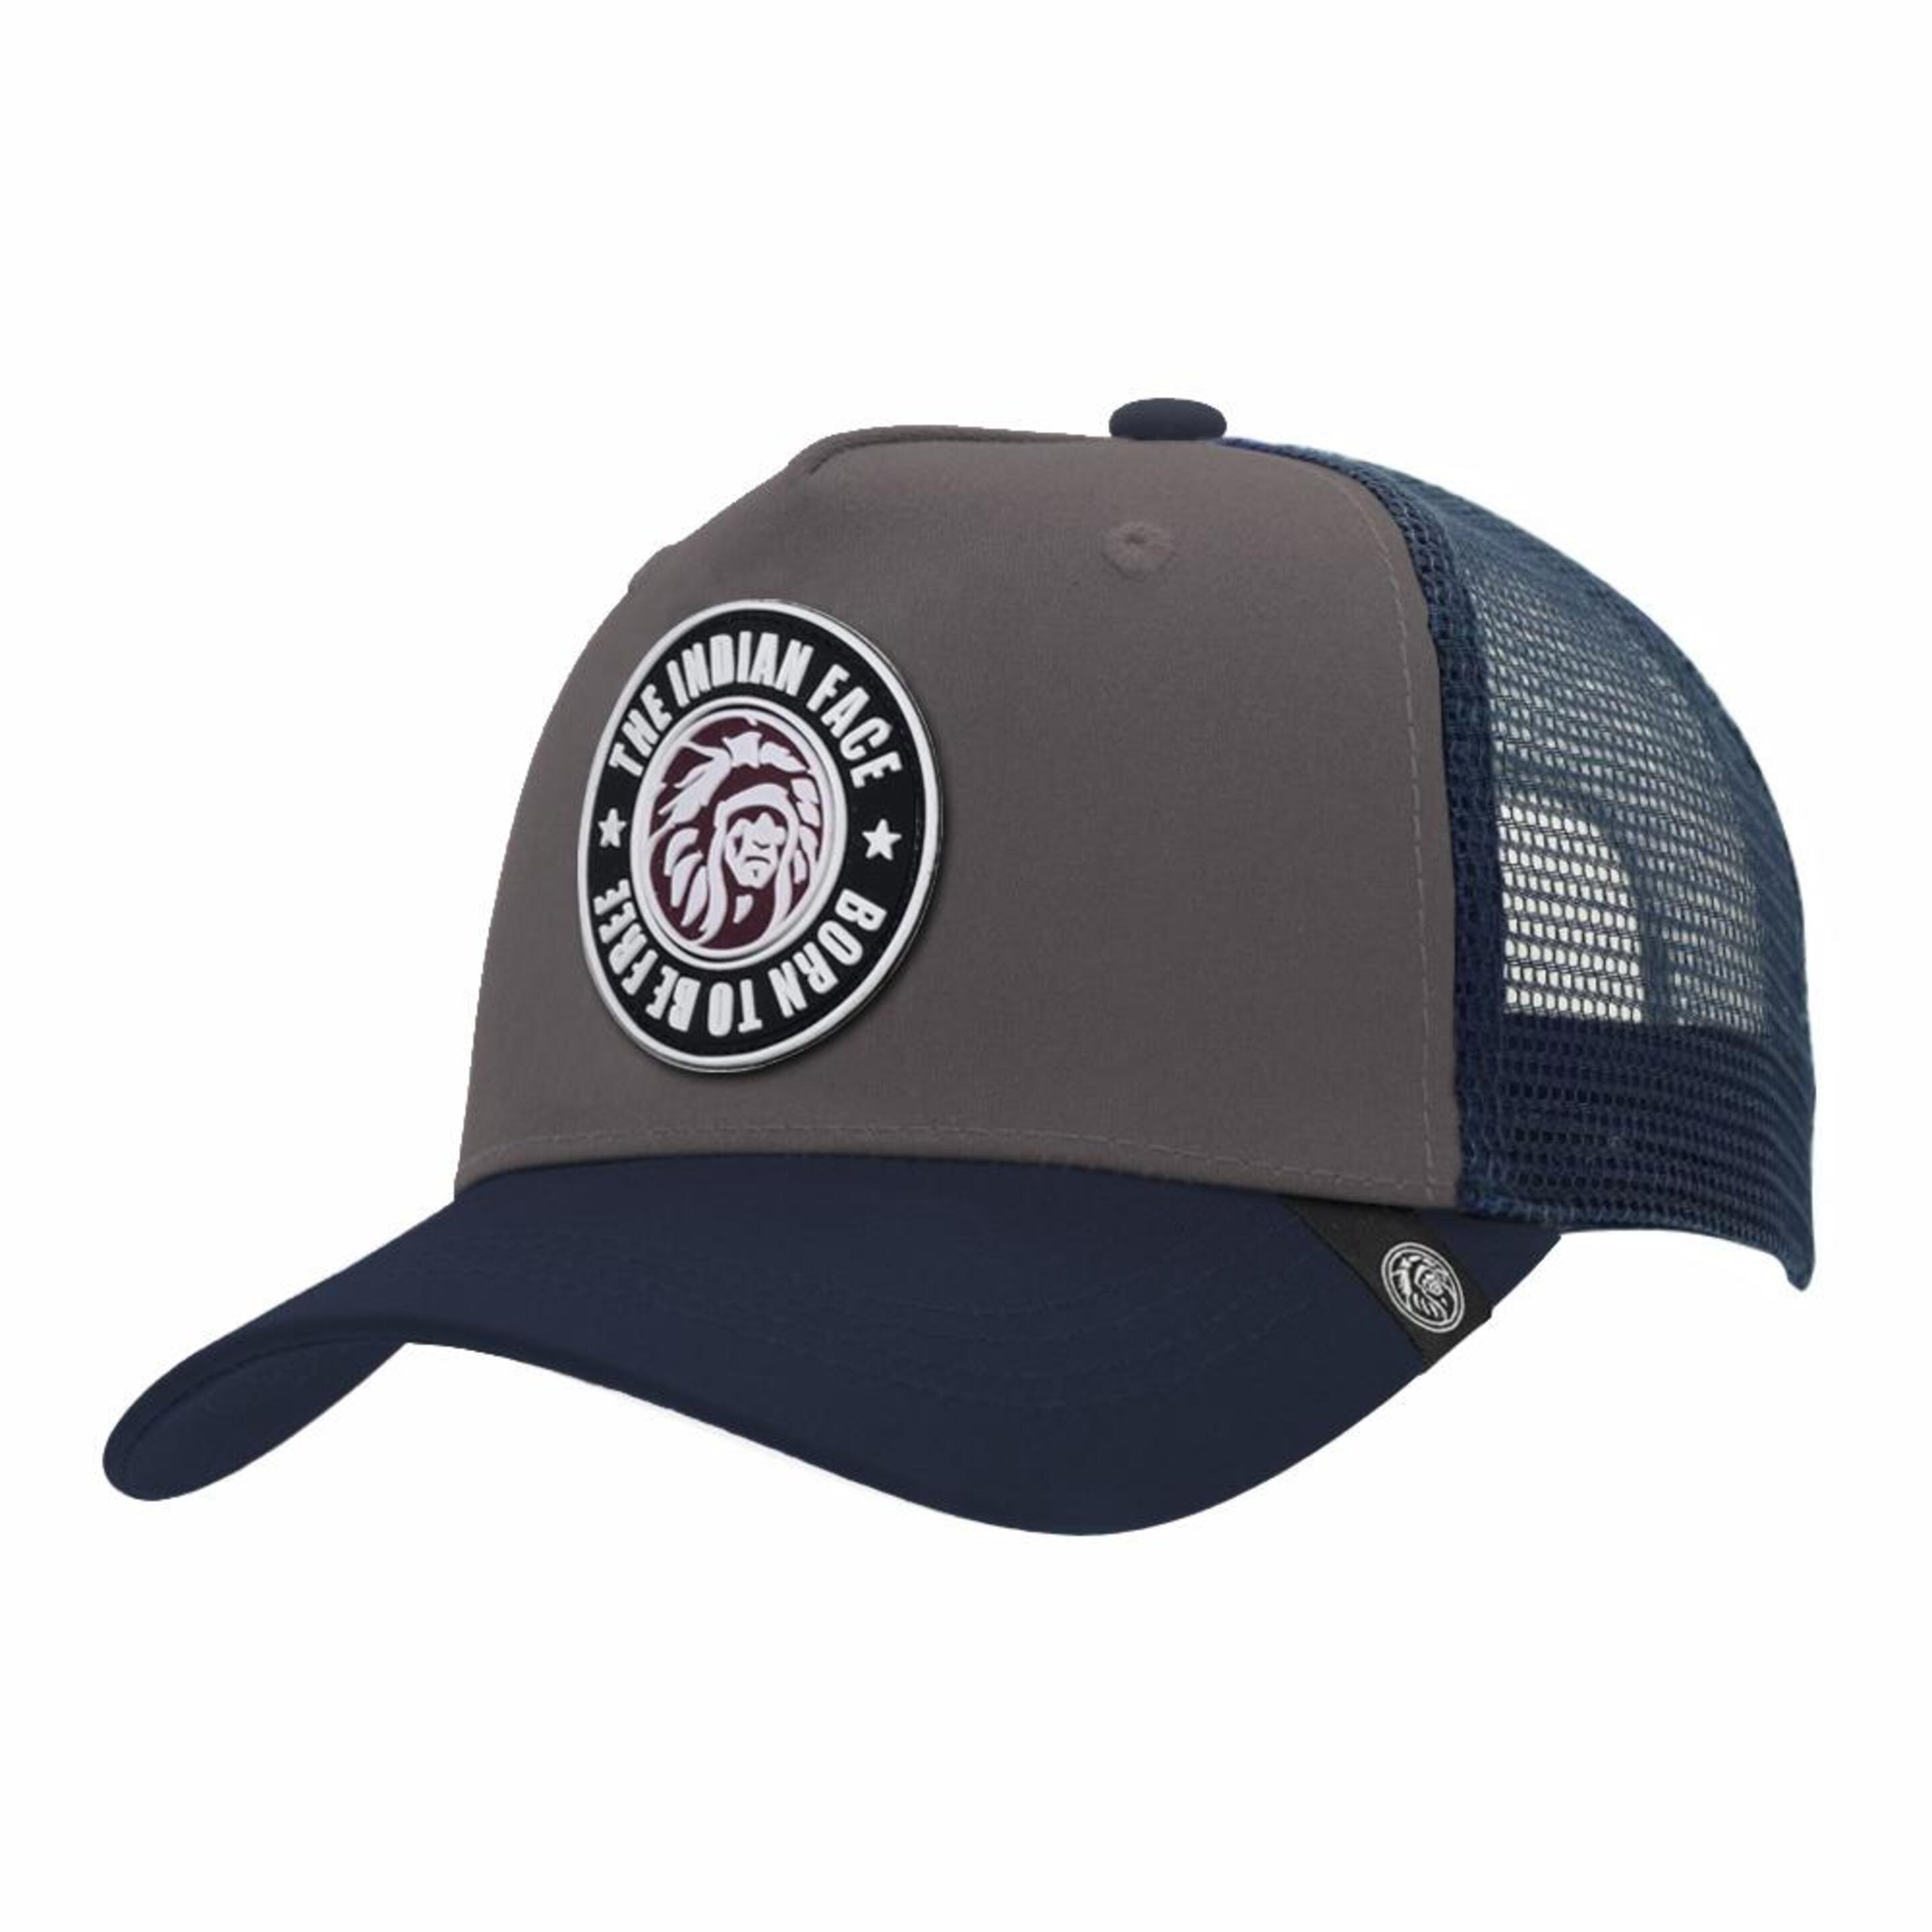 Gorra Trucker Born To Be Free Gris The Indian Face Para Hombre Y Mujer